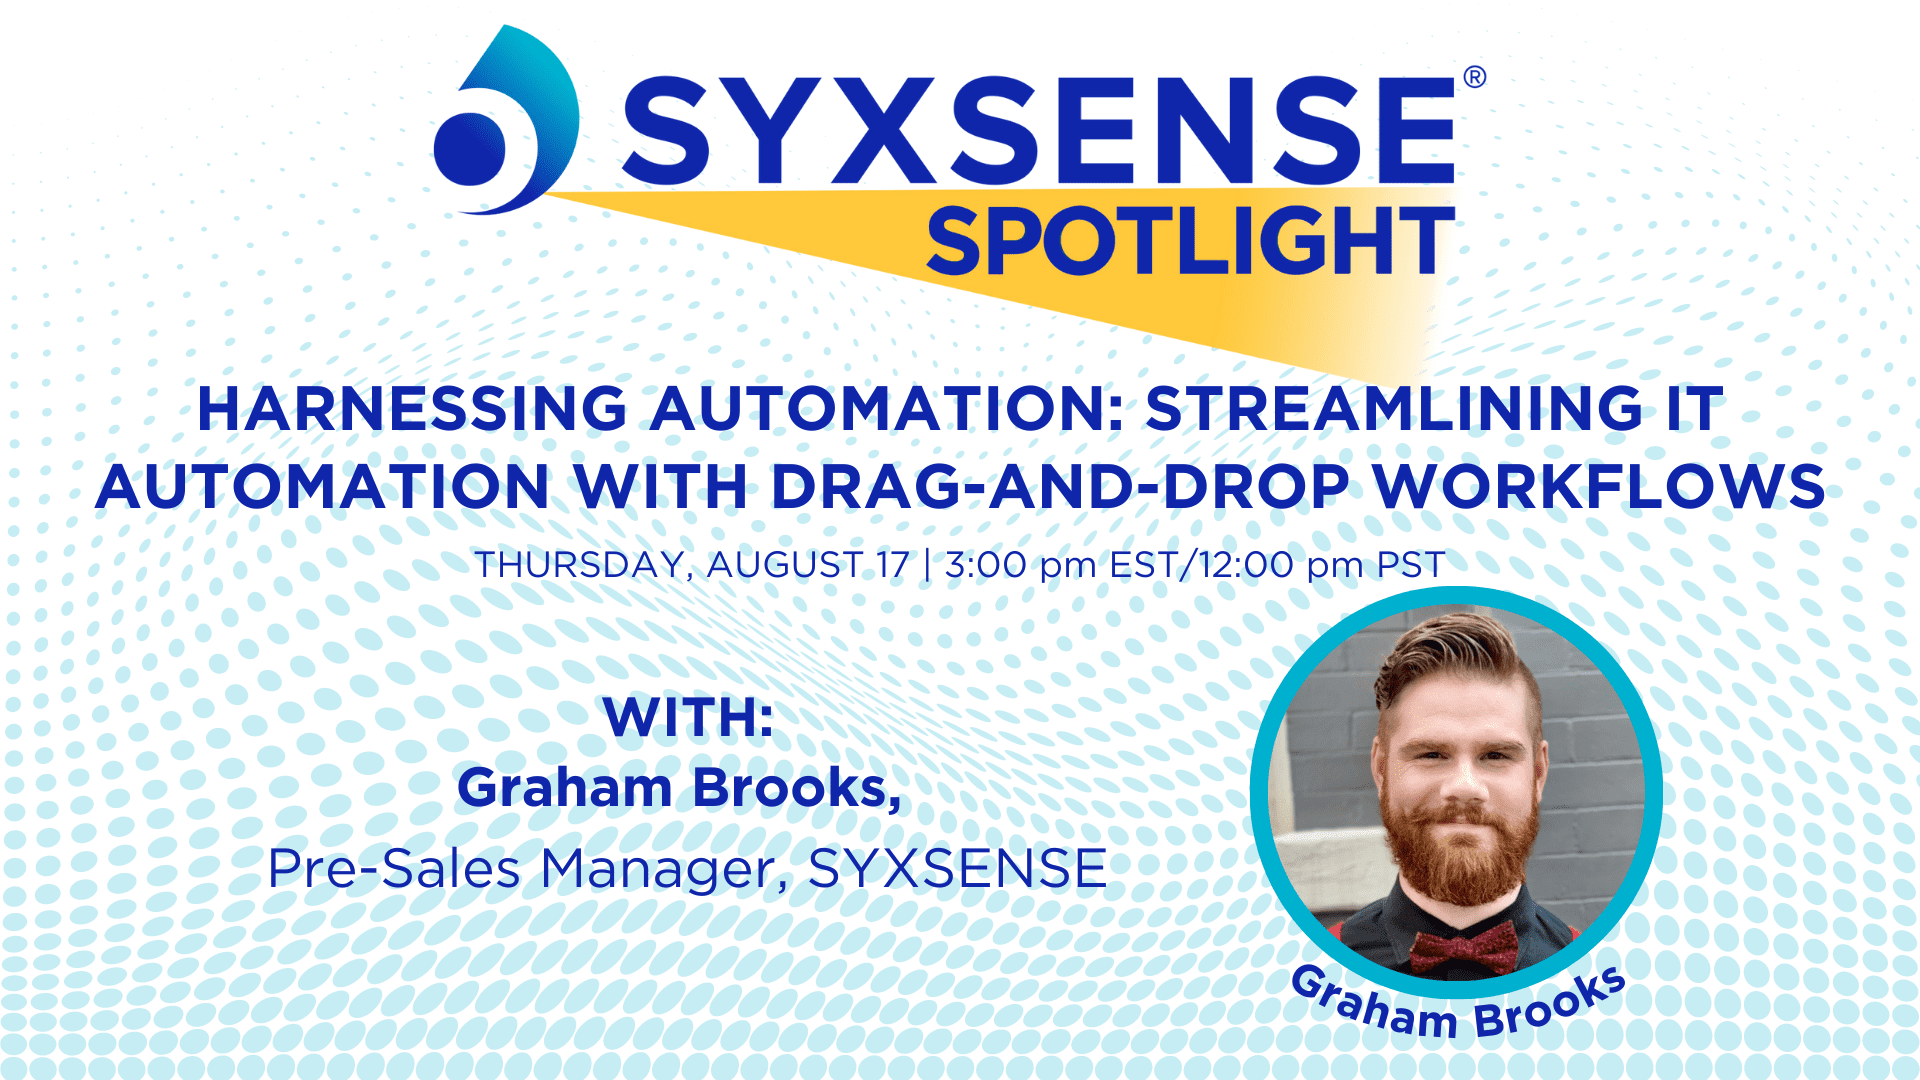 Harnessing Automation: Streamlining IT Automation with Drag-and-Drop Workflows